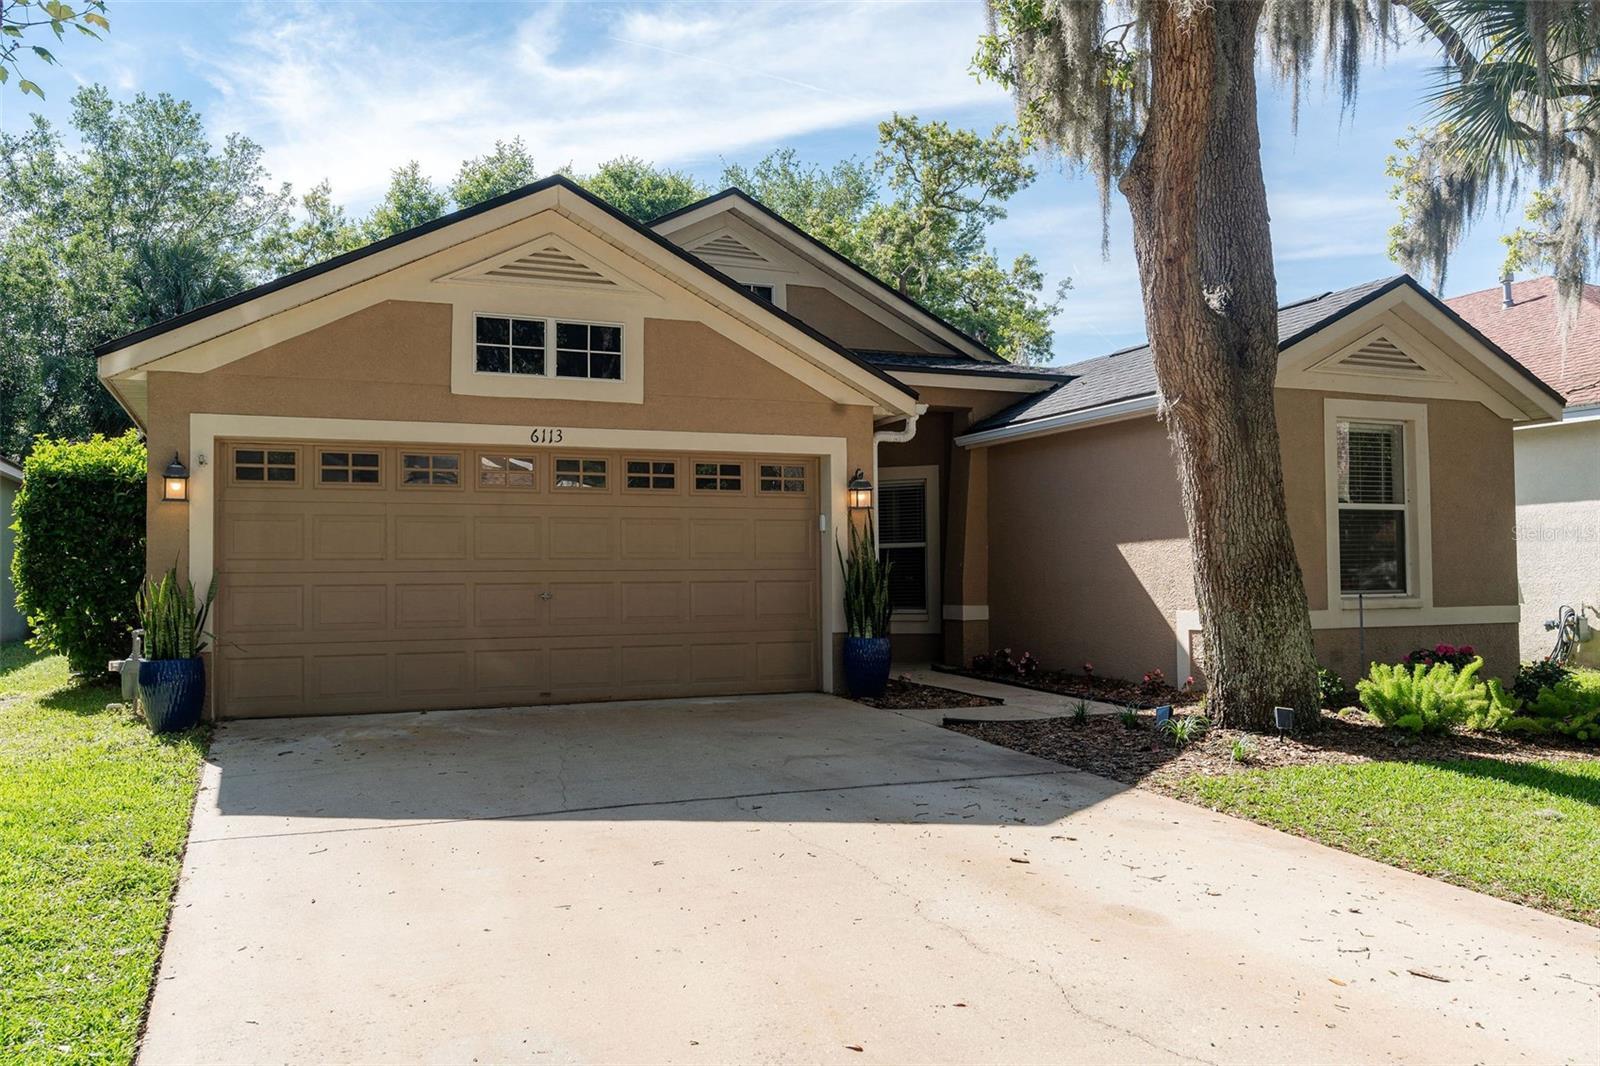 Photo one of 6113 Gannetwood Pl Lithia FL 33547 | MLS T3517196